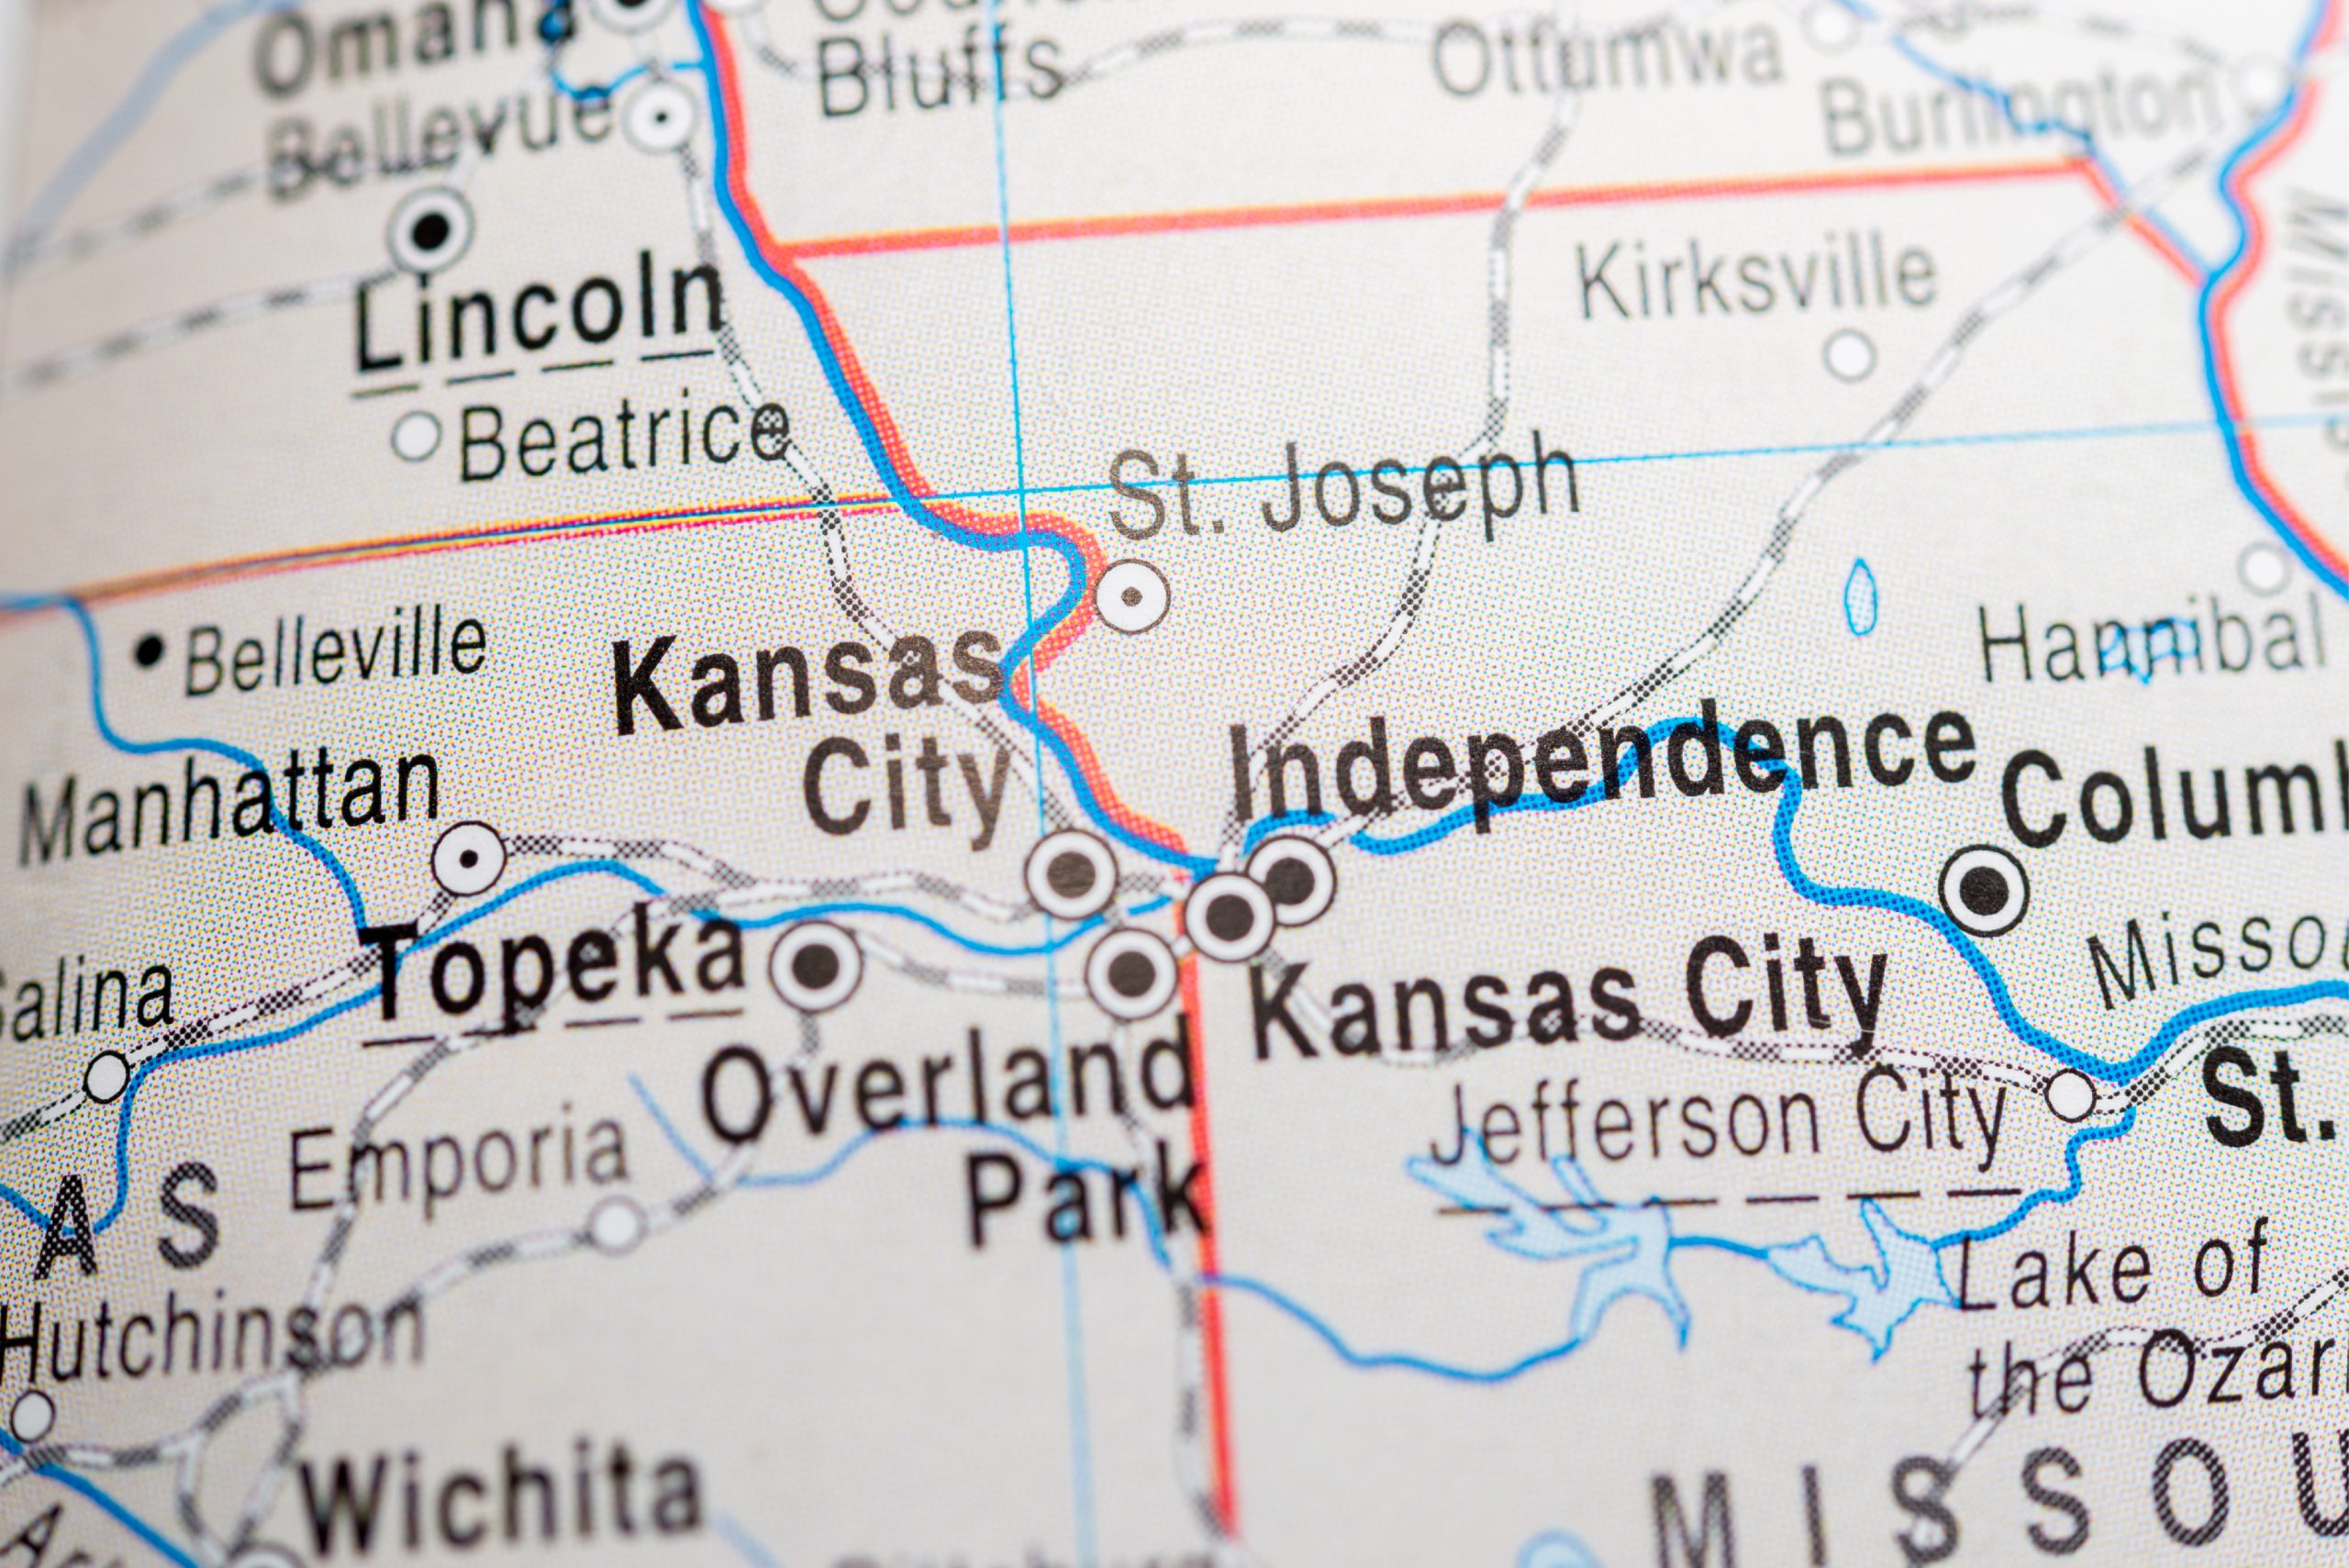 Close up of Kansas Missouri state line map border with other large cities in the area shown